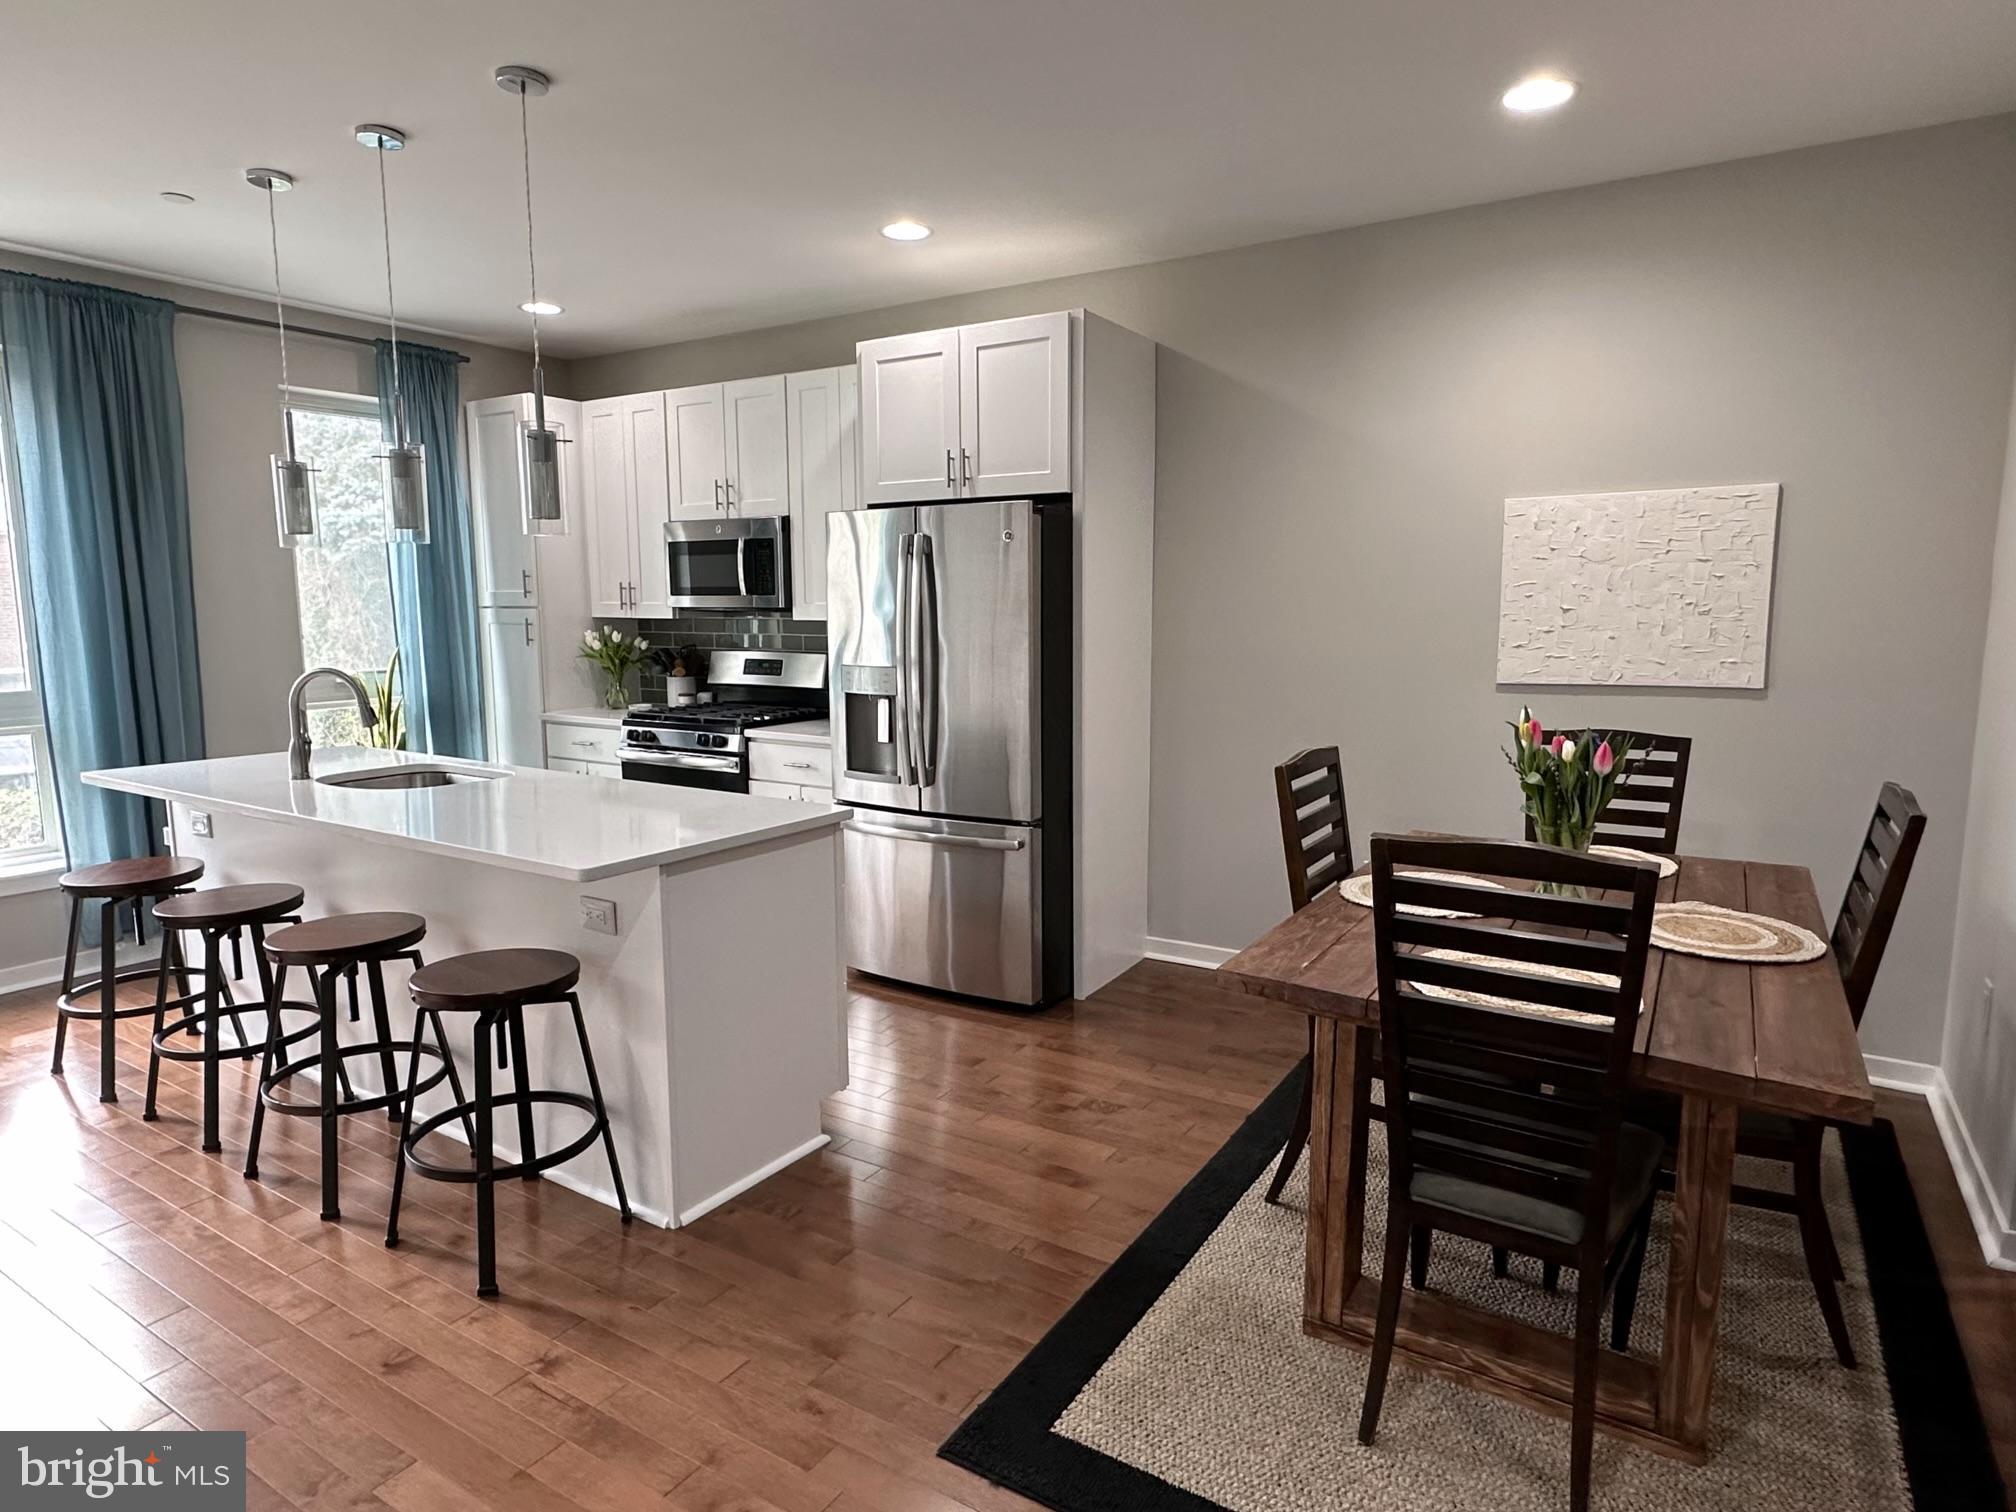 a kitchen with kitchen island a wooden floor and chairs